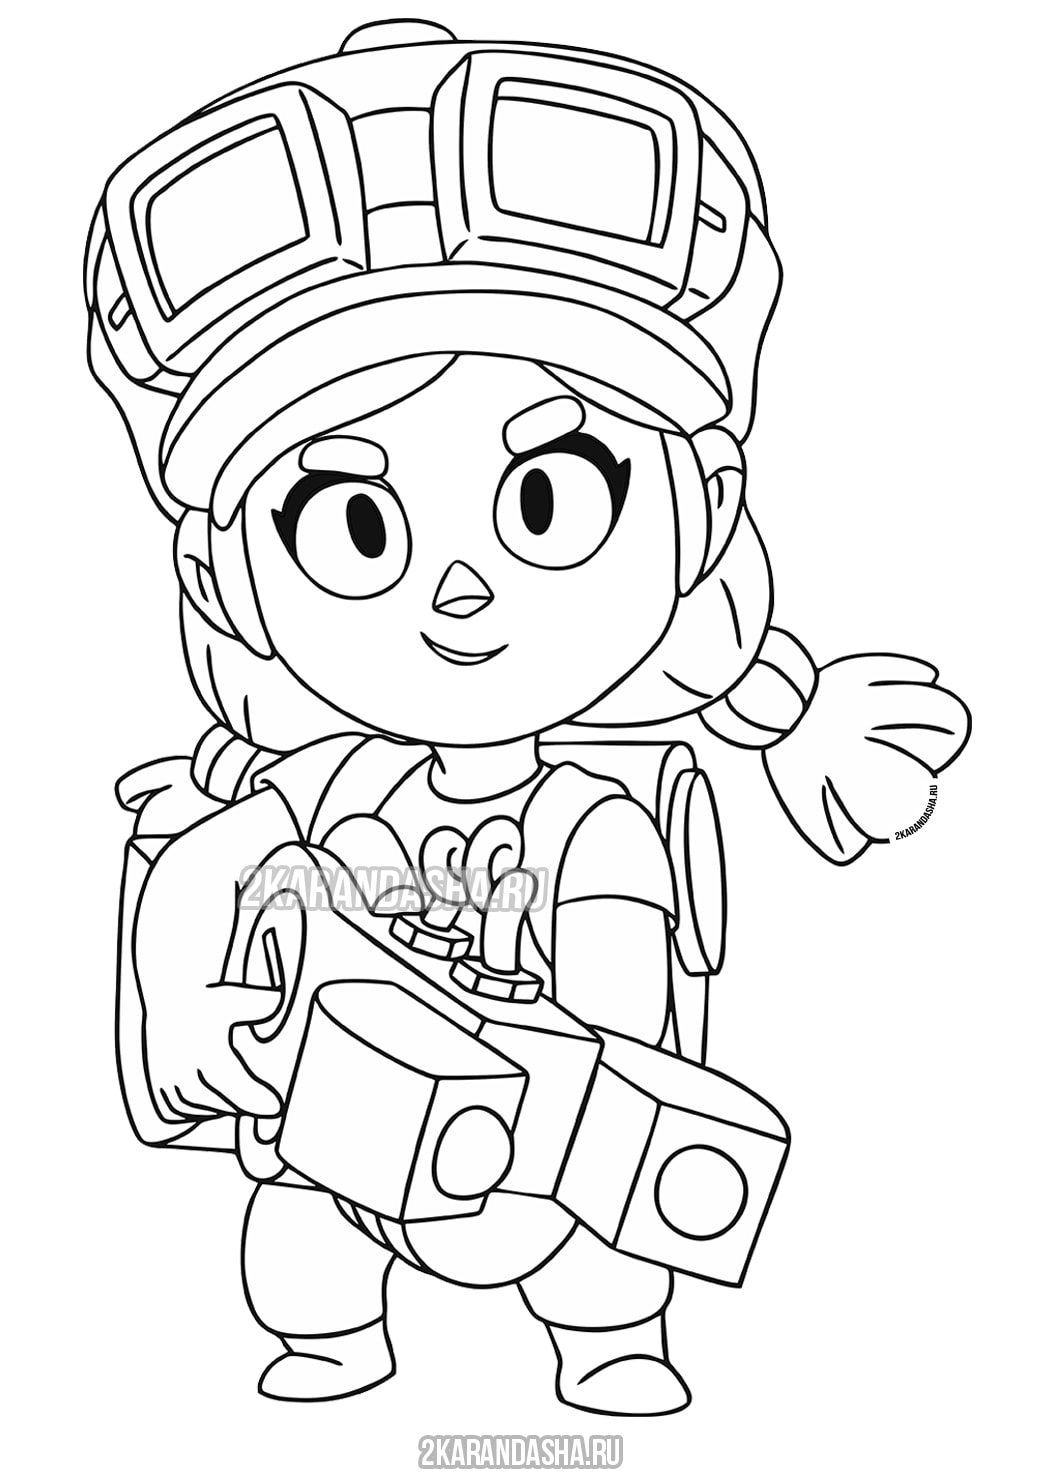 Coloring Page Brawl Stars Skin Jesse With A Rifle Print Brawl Stars - jessie brawl stars coloring pages